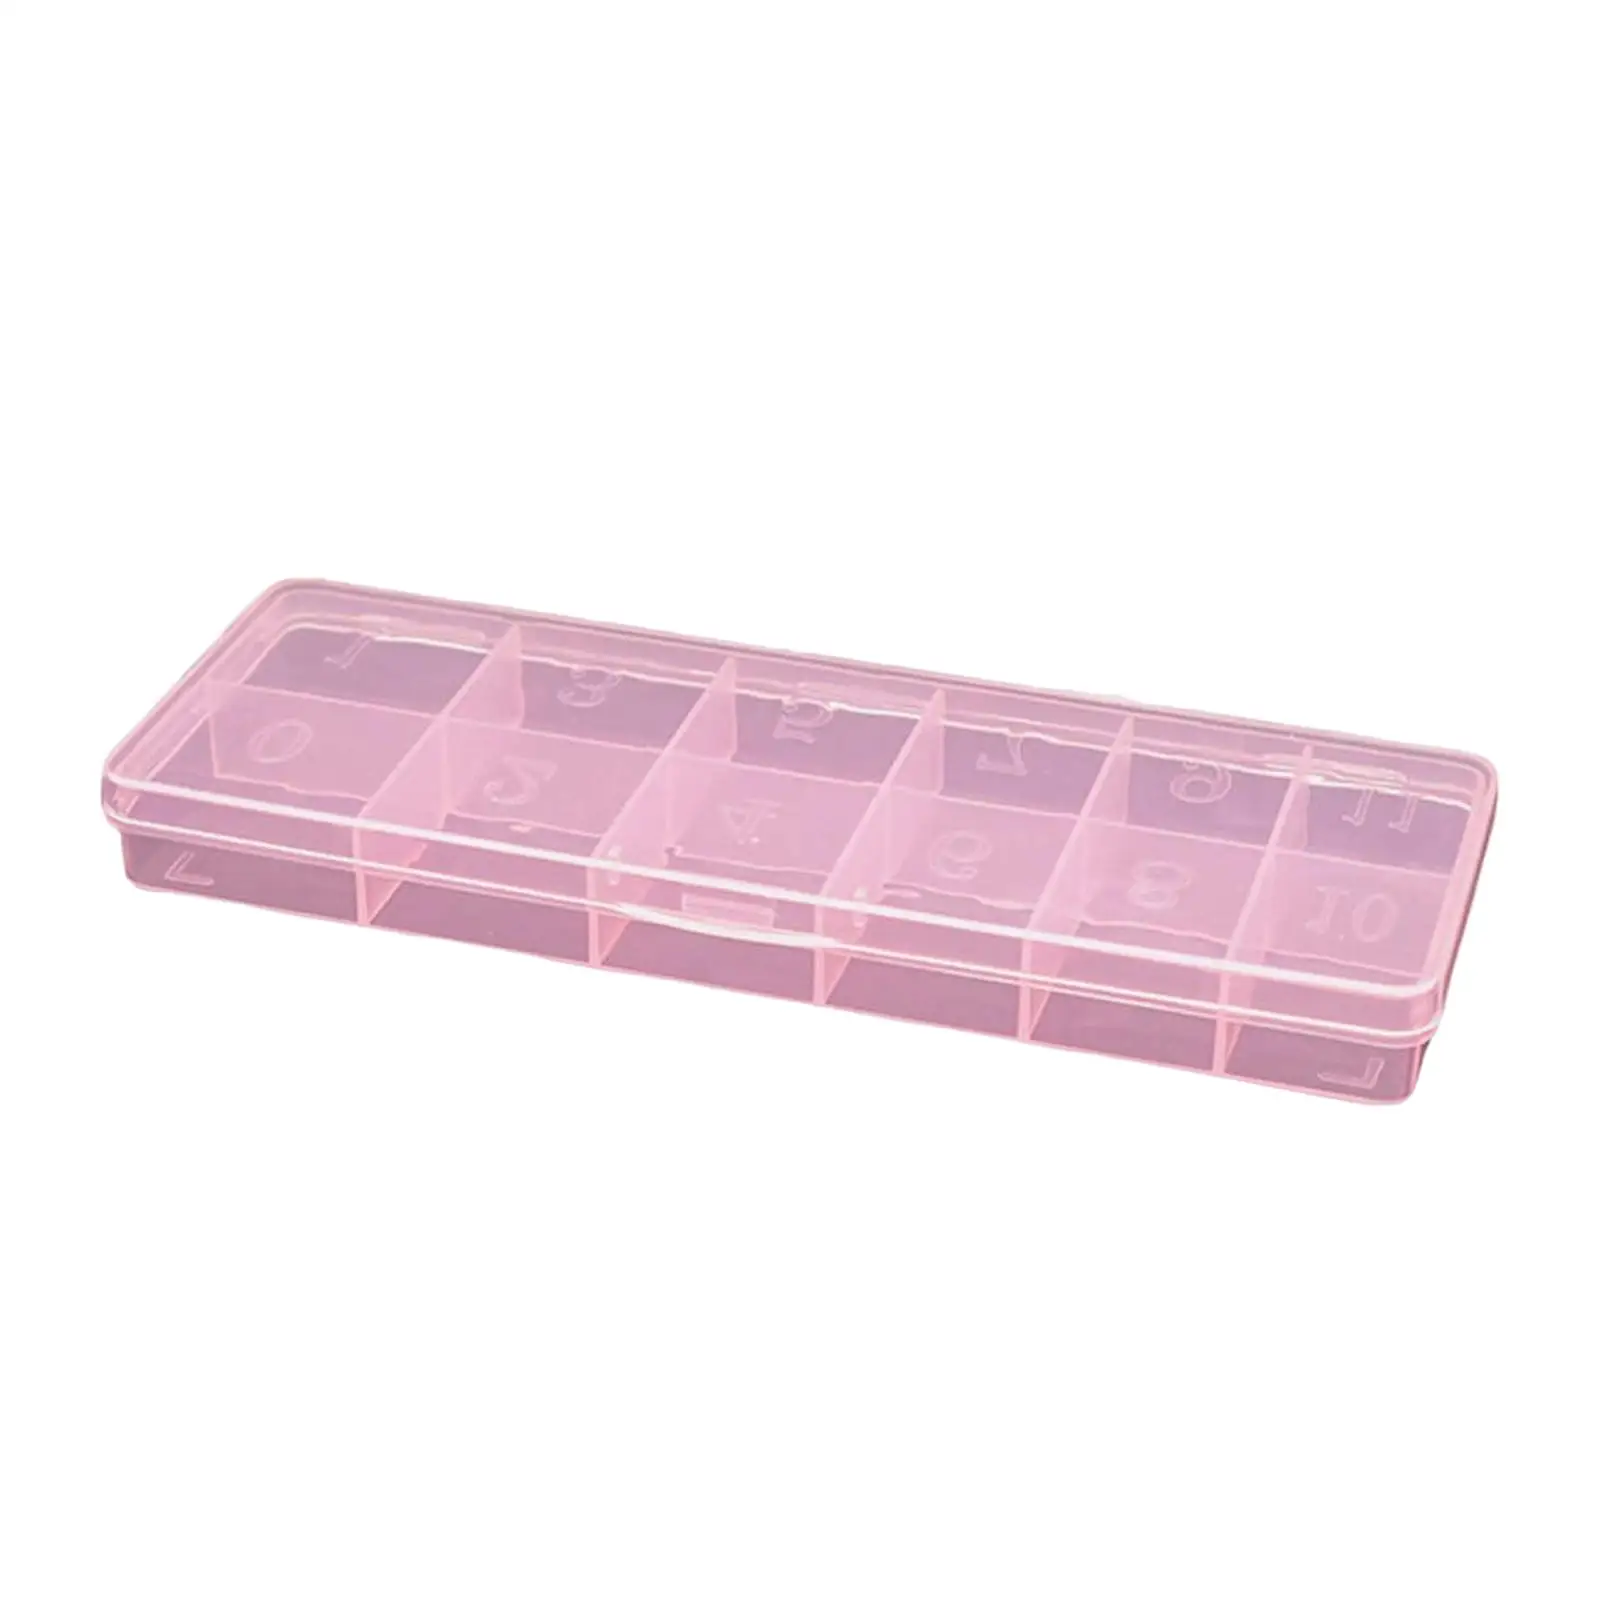 Plastic Nail Art Tip Storage Organizer Box with 10 Grid Boxes 12 Slots Empty Nail Art Tools Case for Beads Glitters Art Crafts